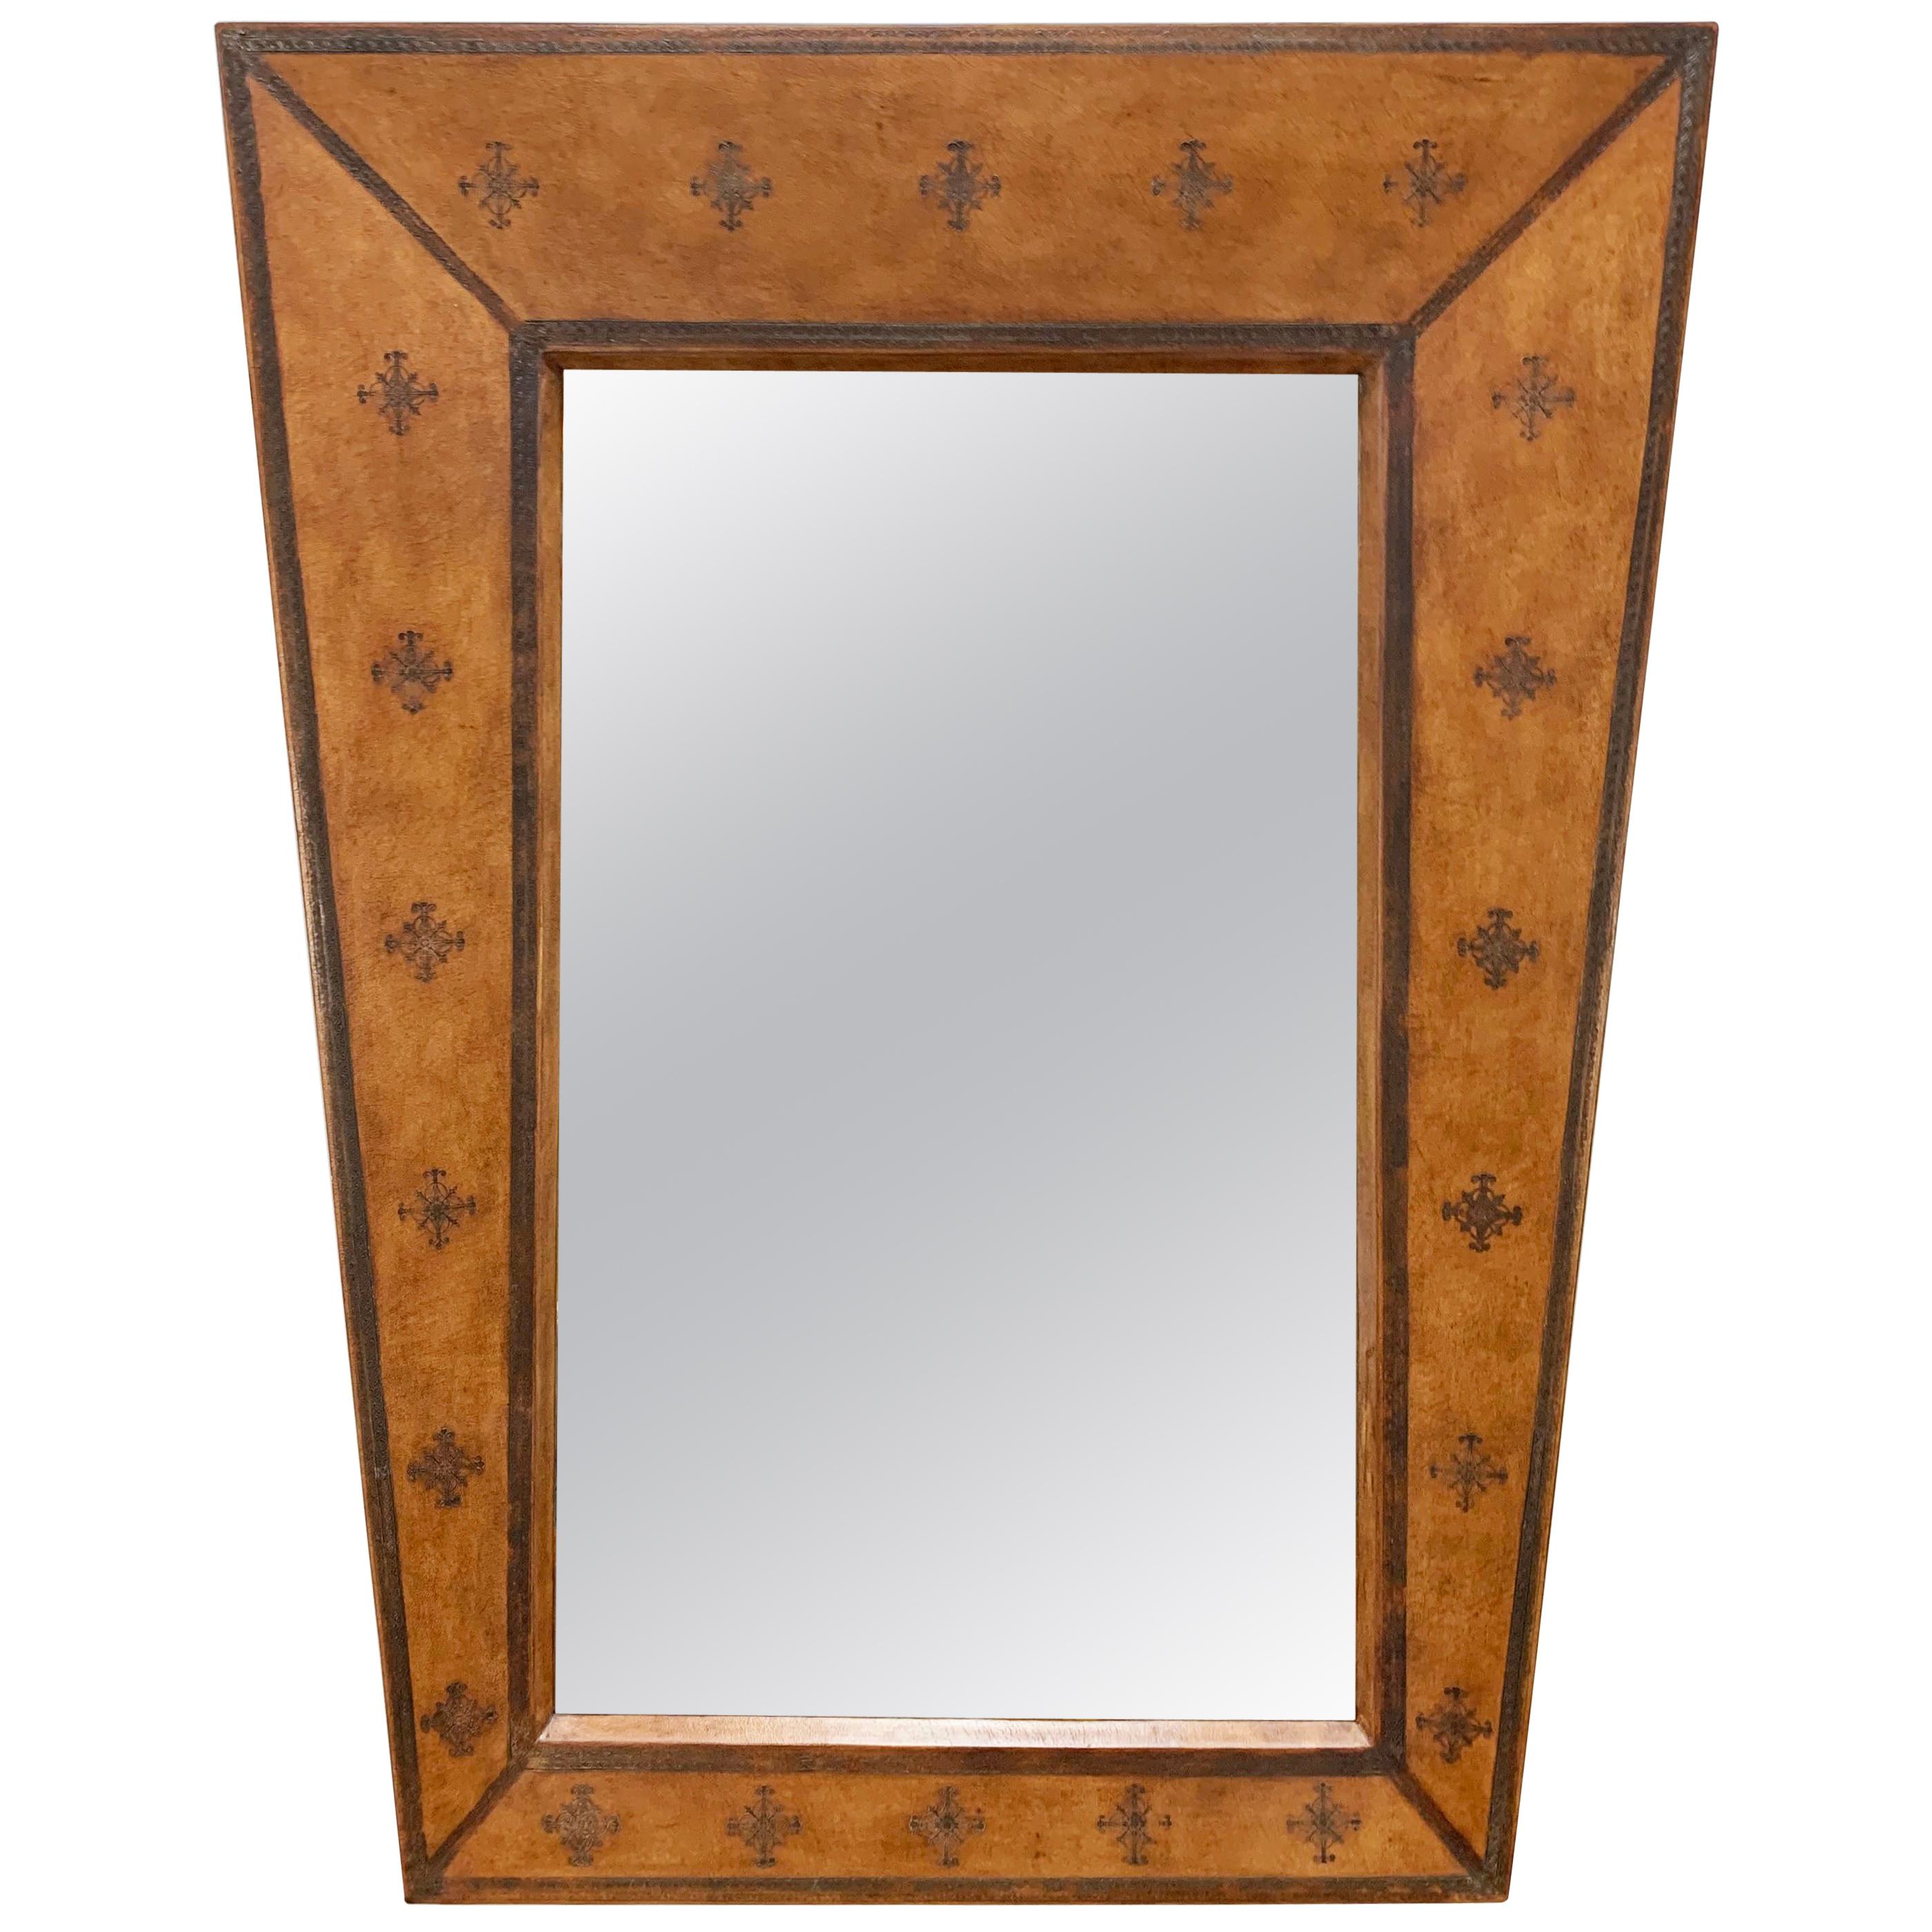 Trapezoidal Wall Mirror in Tooled Leather, c. 20th Century